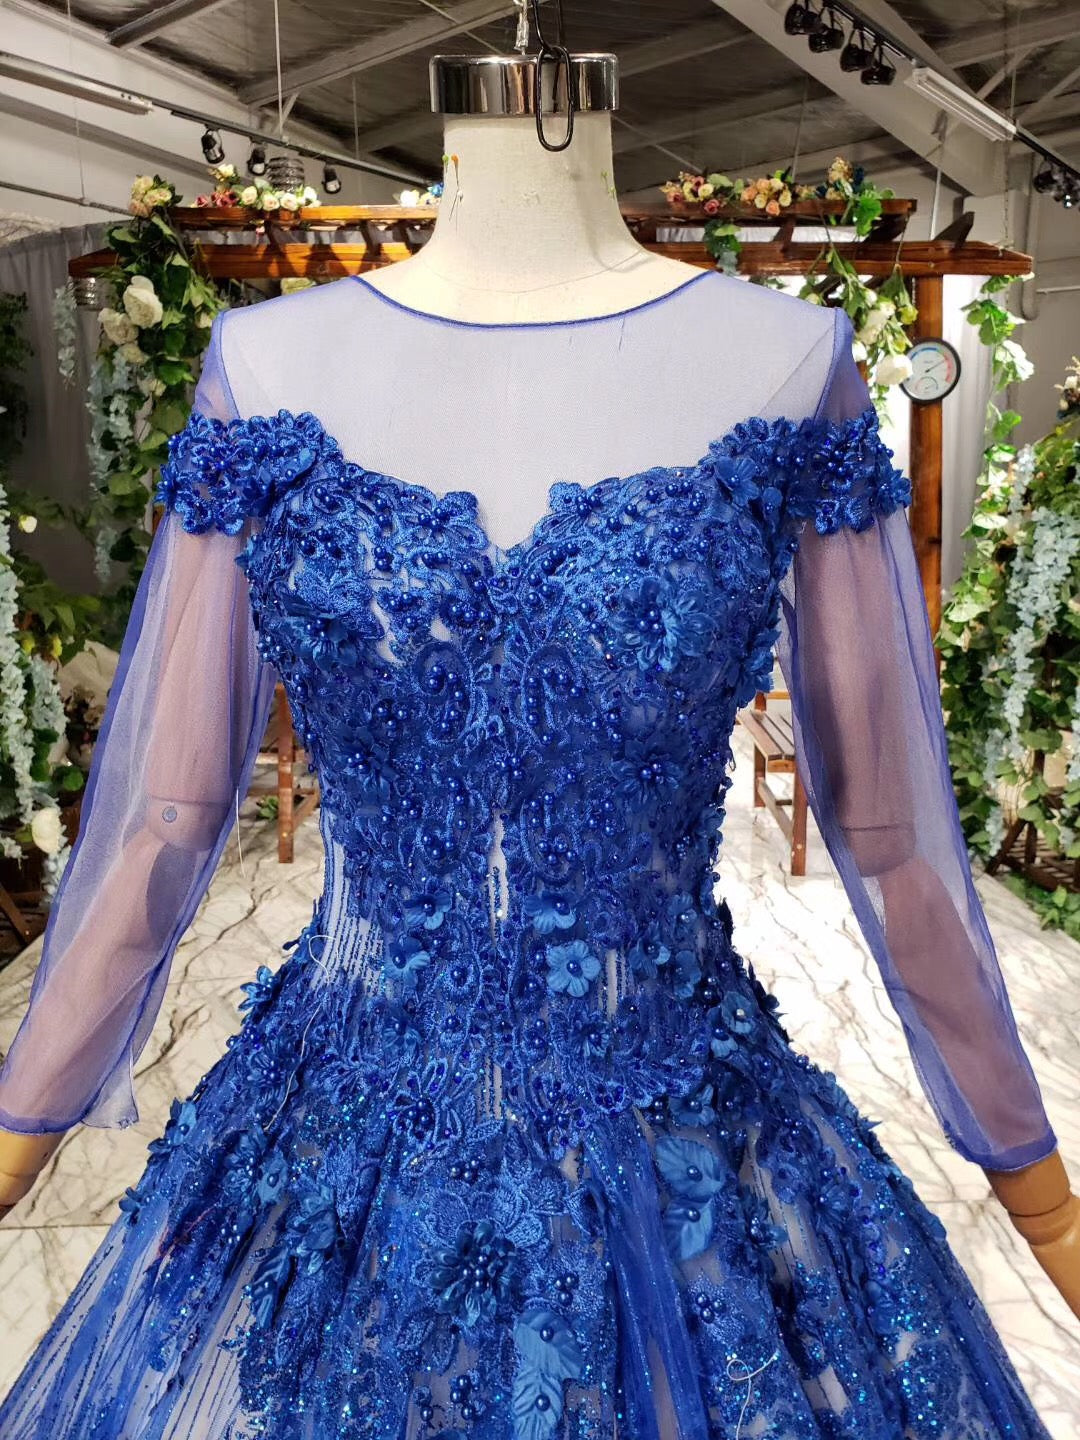 Sheer Neck Tulle Blue Ball Gown Beaded Applique Long Sleeve Prom Dresses OP872